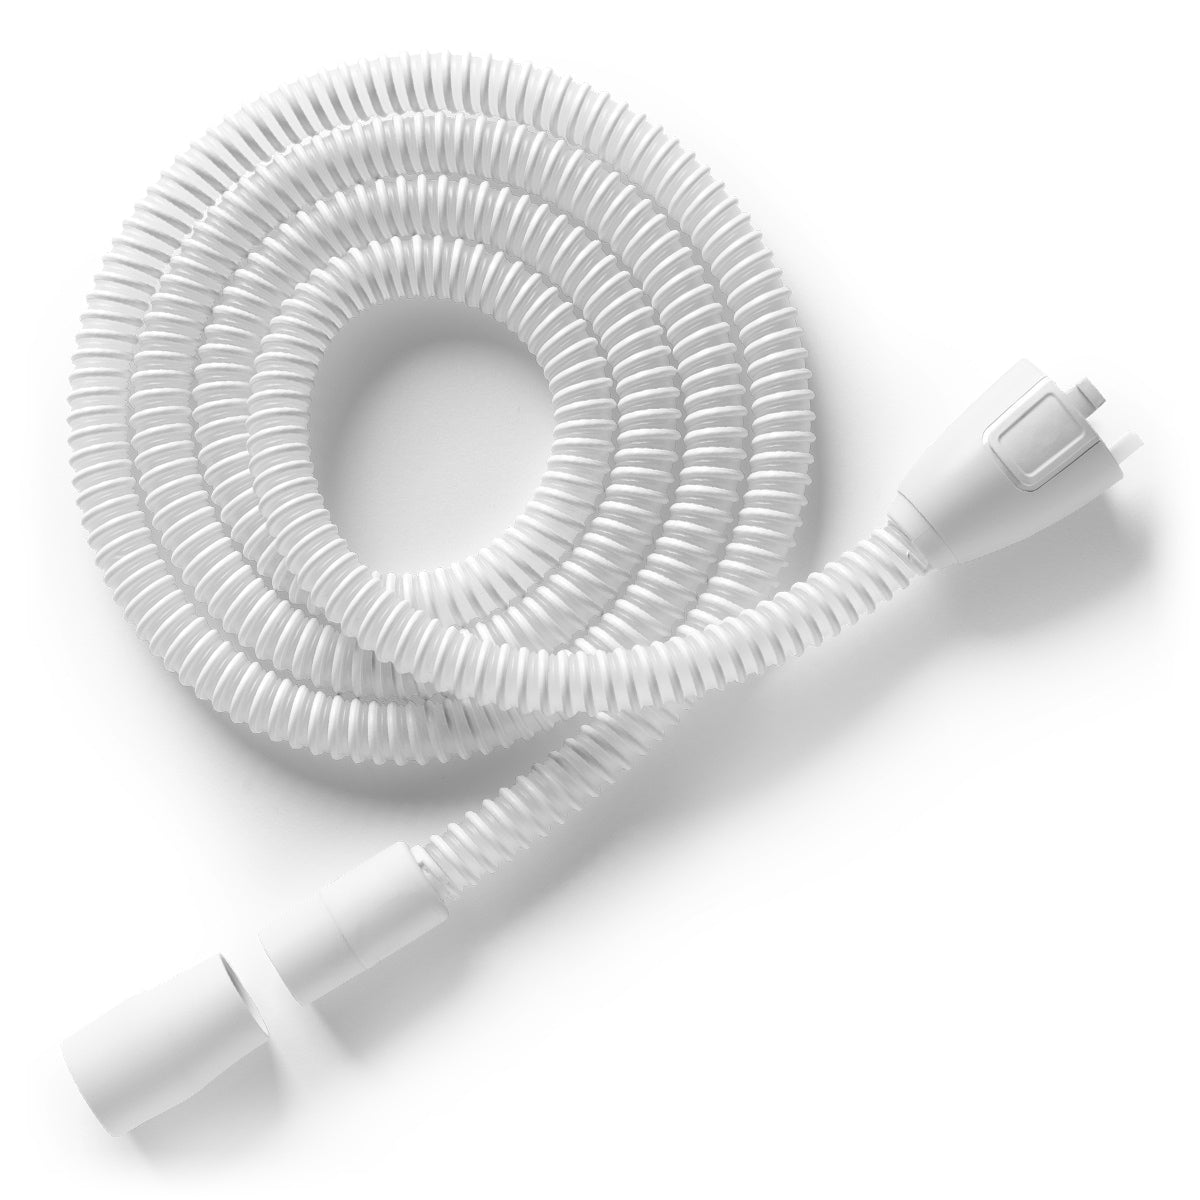 Heated Micro-Flexible Hose Tubing for DreamStation 2 CPAP Machines (6-Foot)